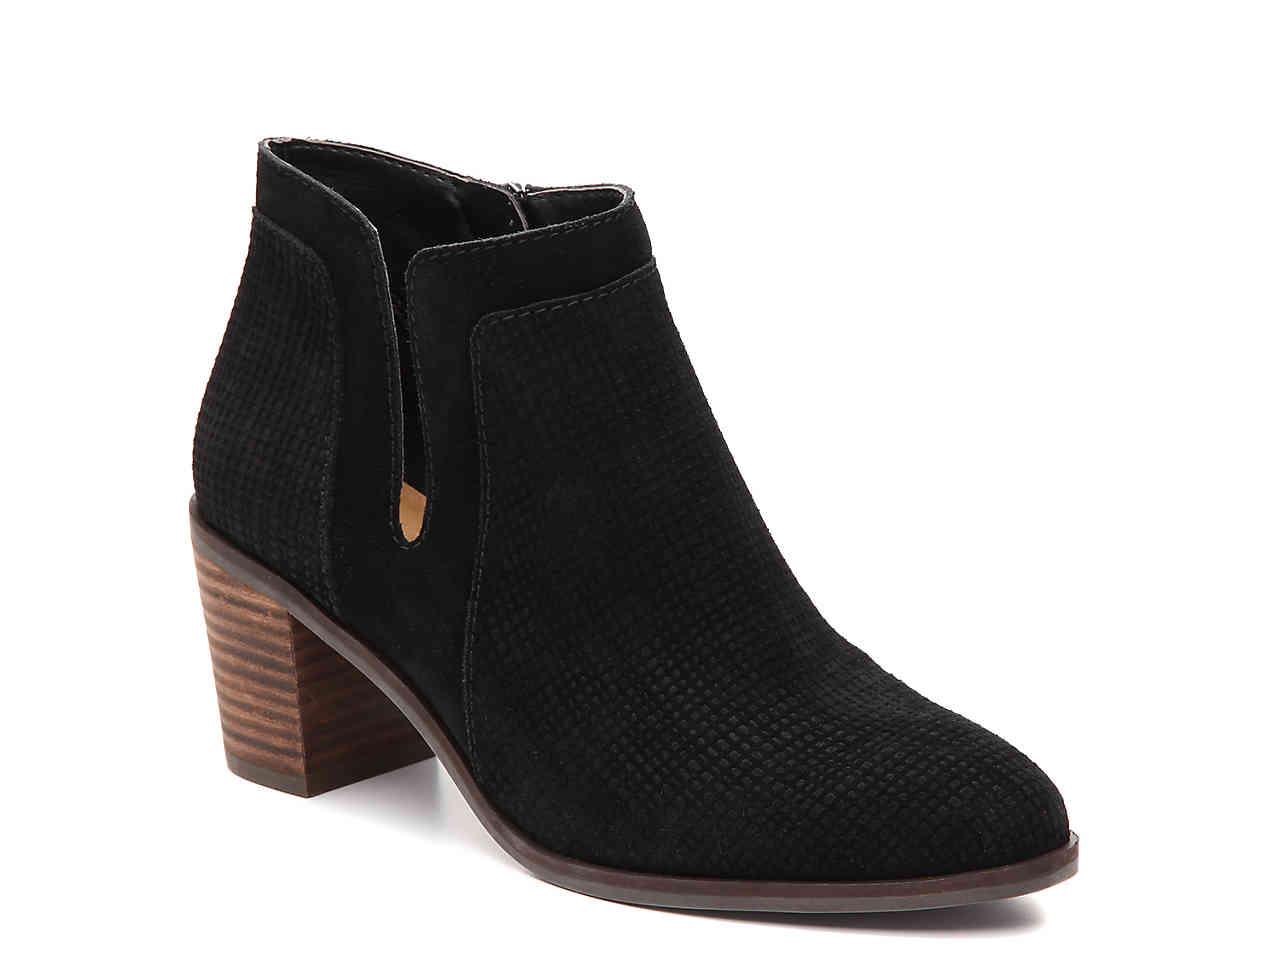 Lucky Brand Suede Ponic Bootie in Black - Lyst